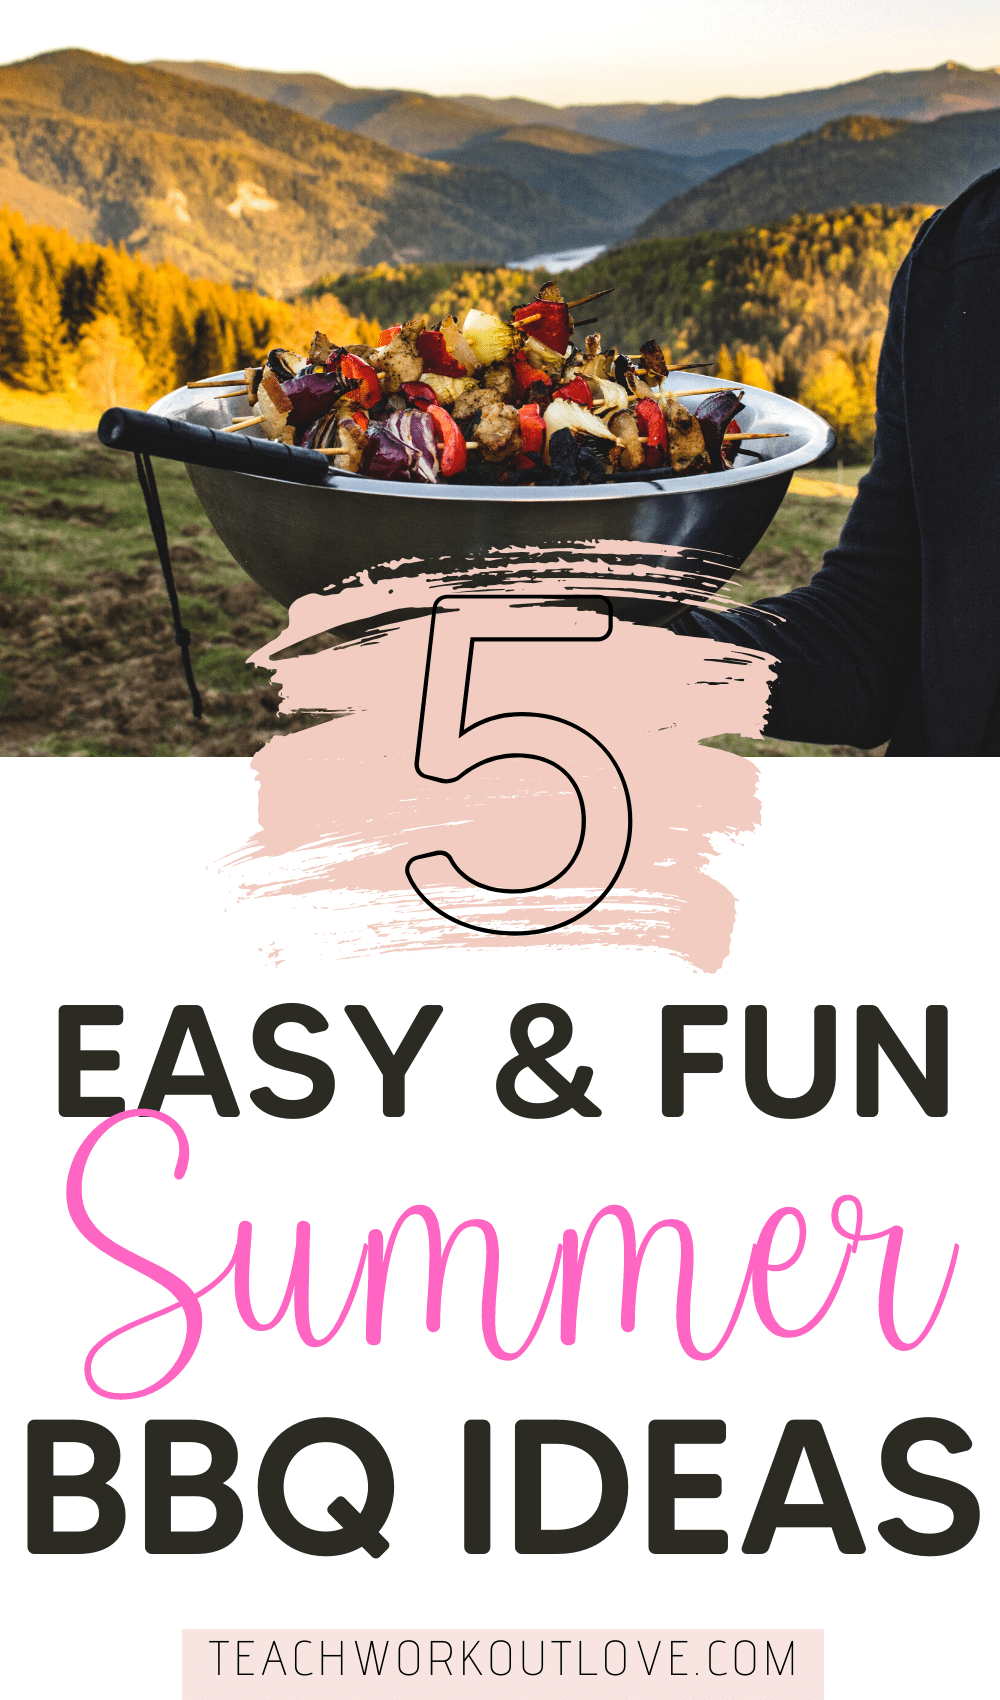 Trying to prepare a easy & fun summer BBQ for friends and family? We have the best summer BBQ ideas for you this year and how to pull it off!